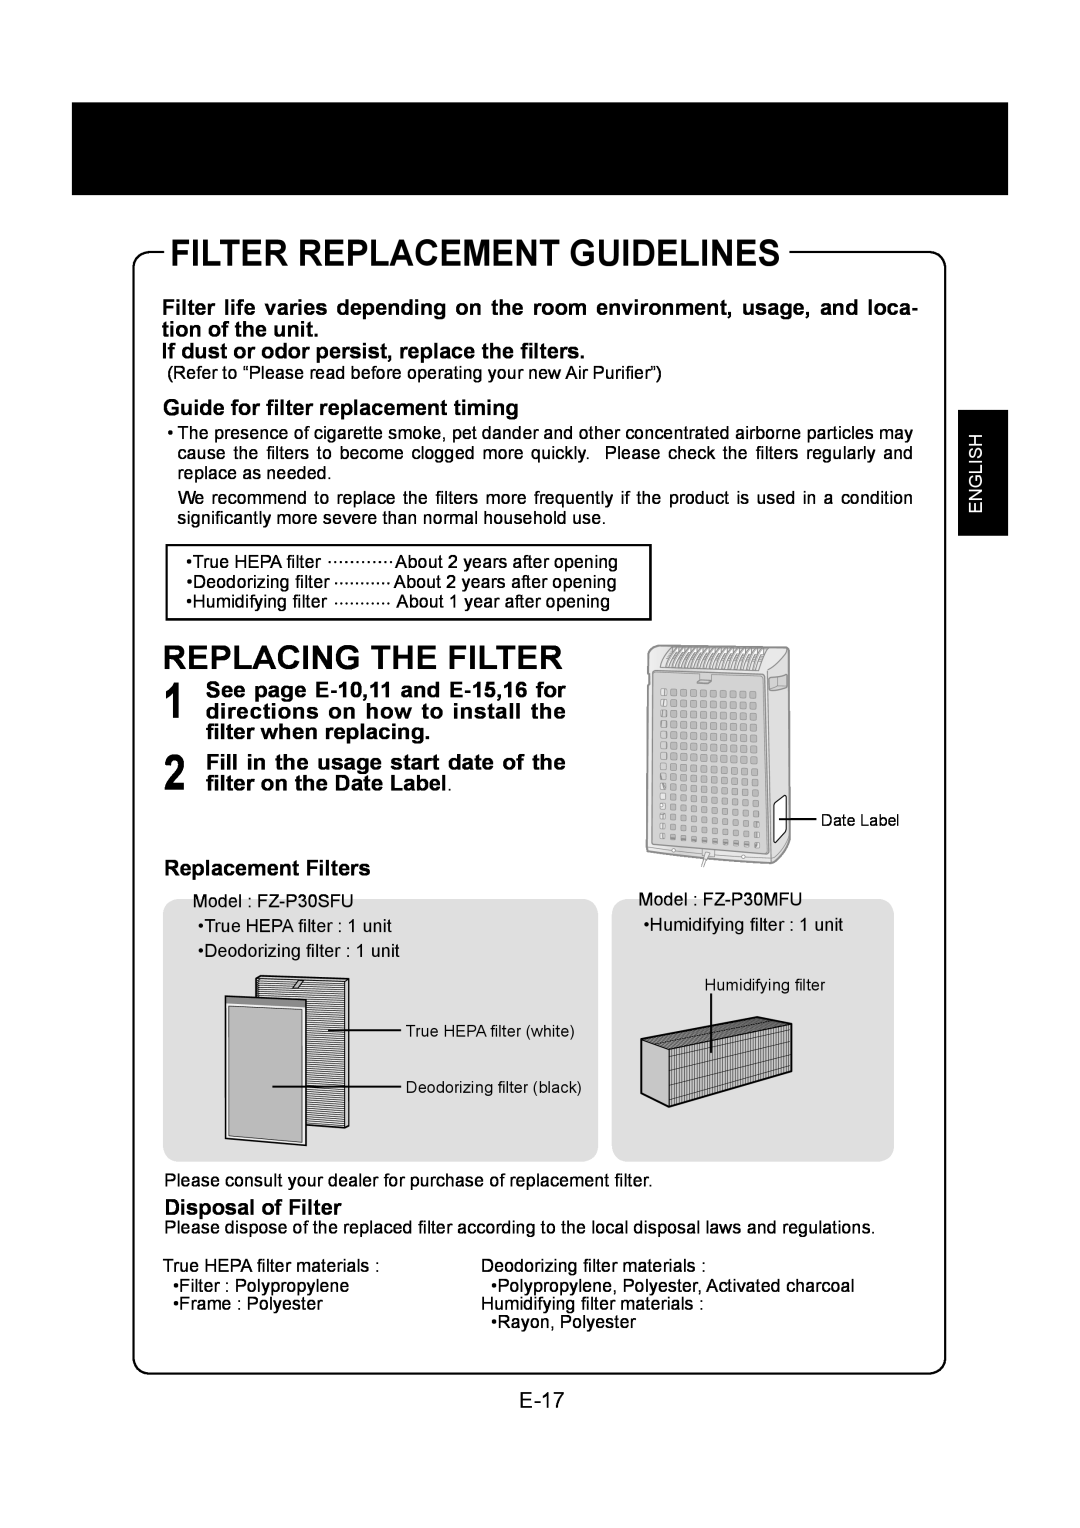 Sharp KC-830U operation manual Filter Replacement Guidelines, Replacing The Filter, E-17, English 